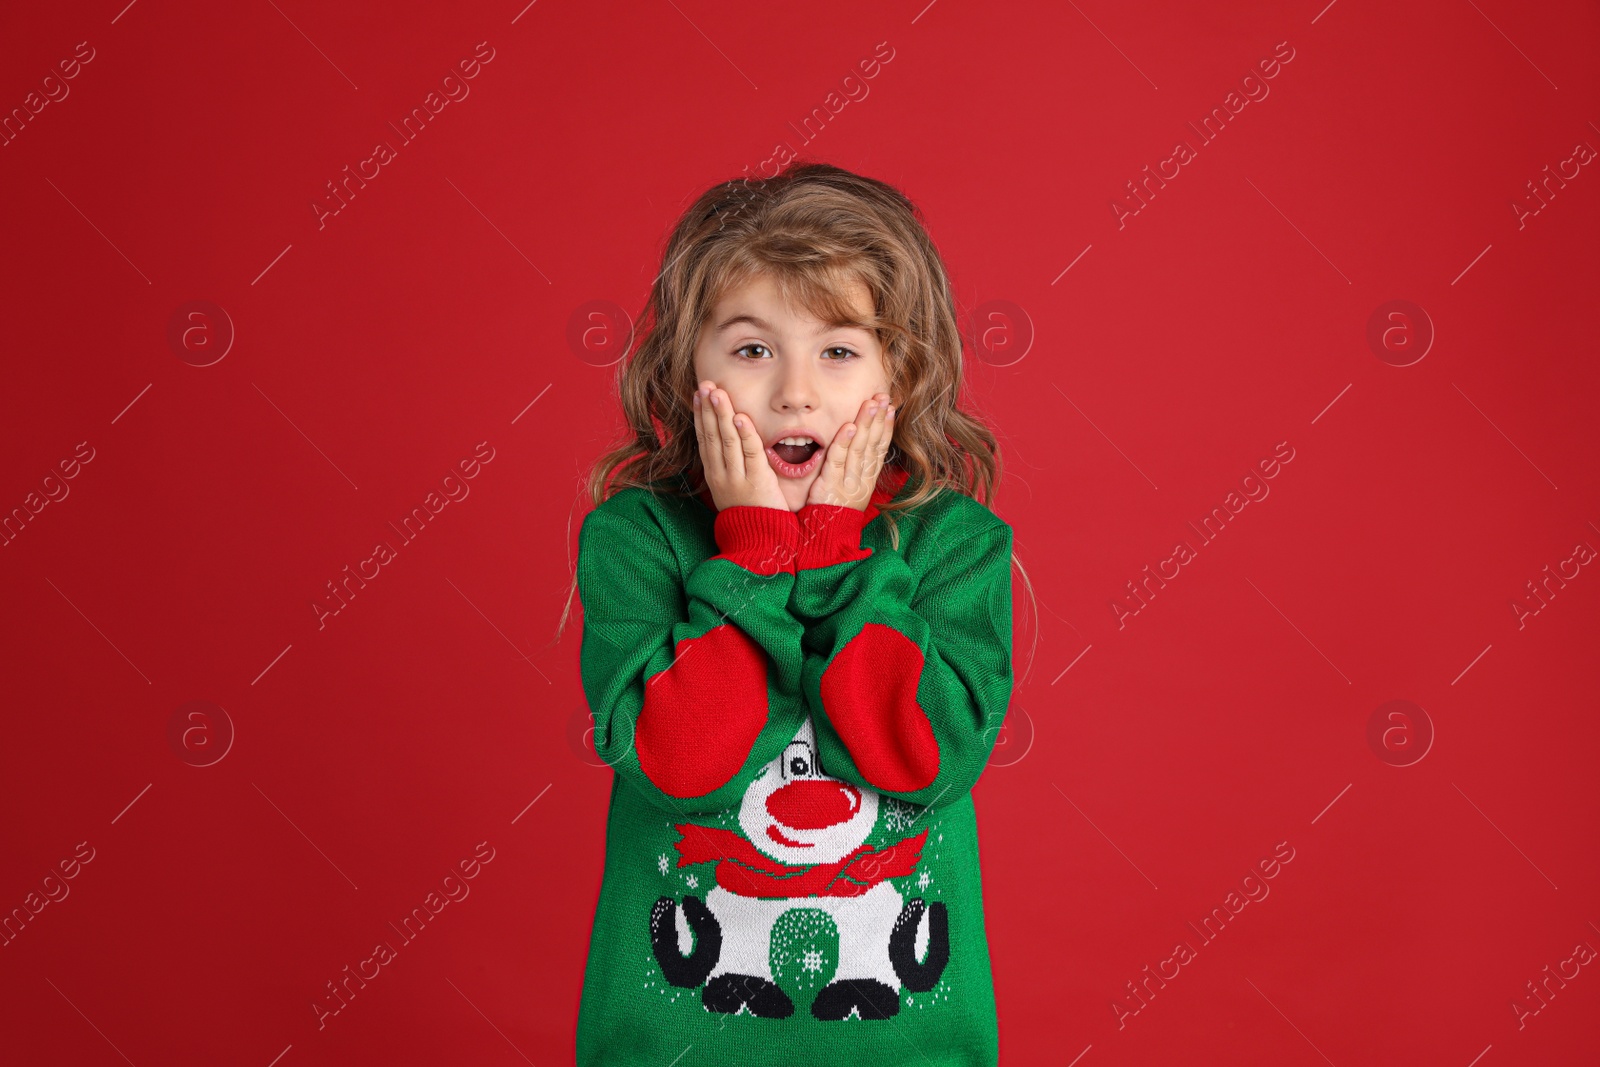 Photo of Surprised little girl in green Christmas sweater against red background